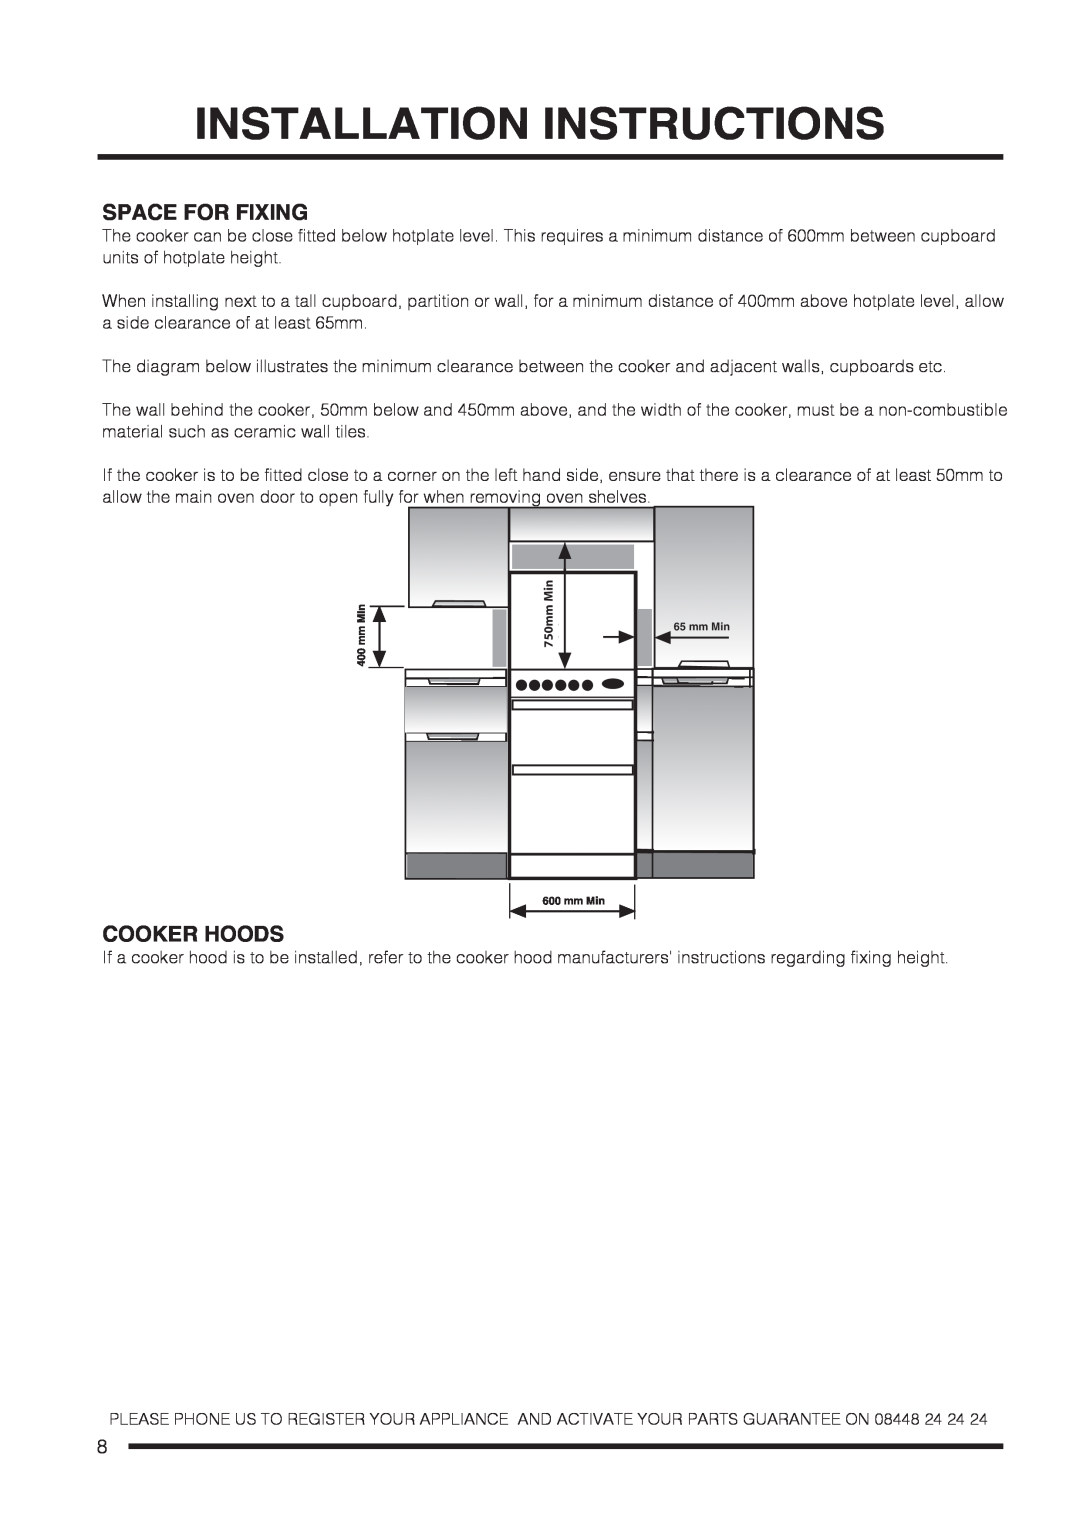 Hotpoint CH60GCIW, CH60GCIS, CH60GCIK Space For Fixing, Cooker Hoods, Installation Instructions, 750mm 